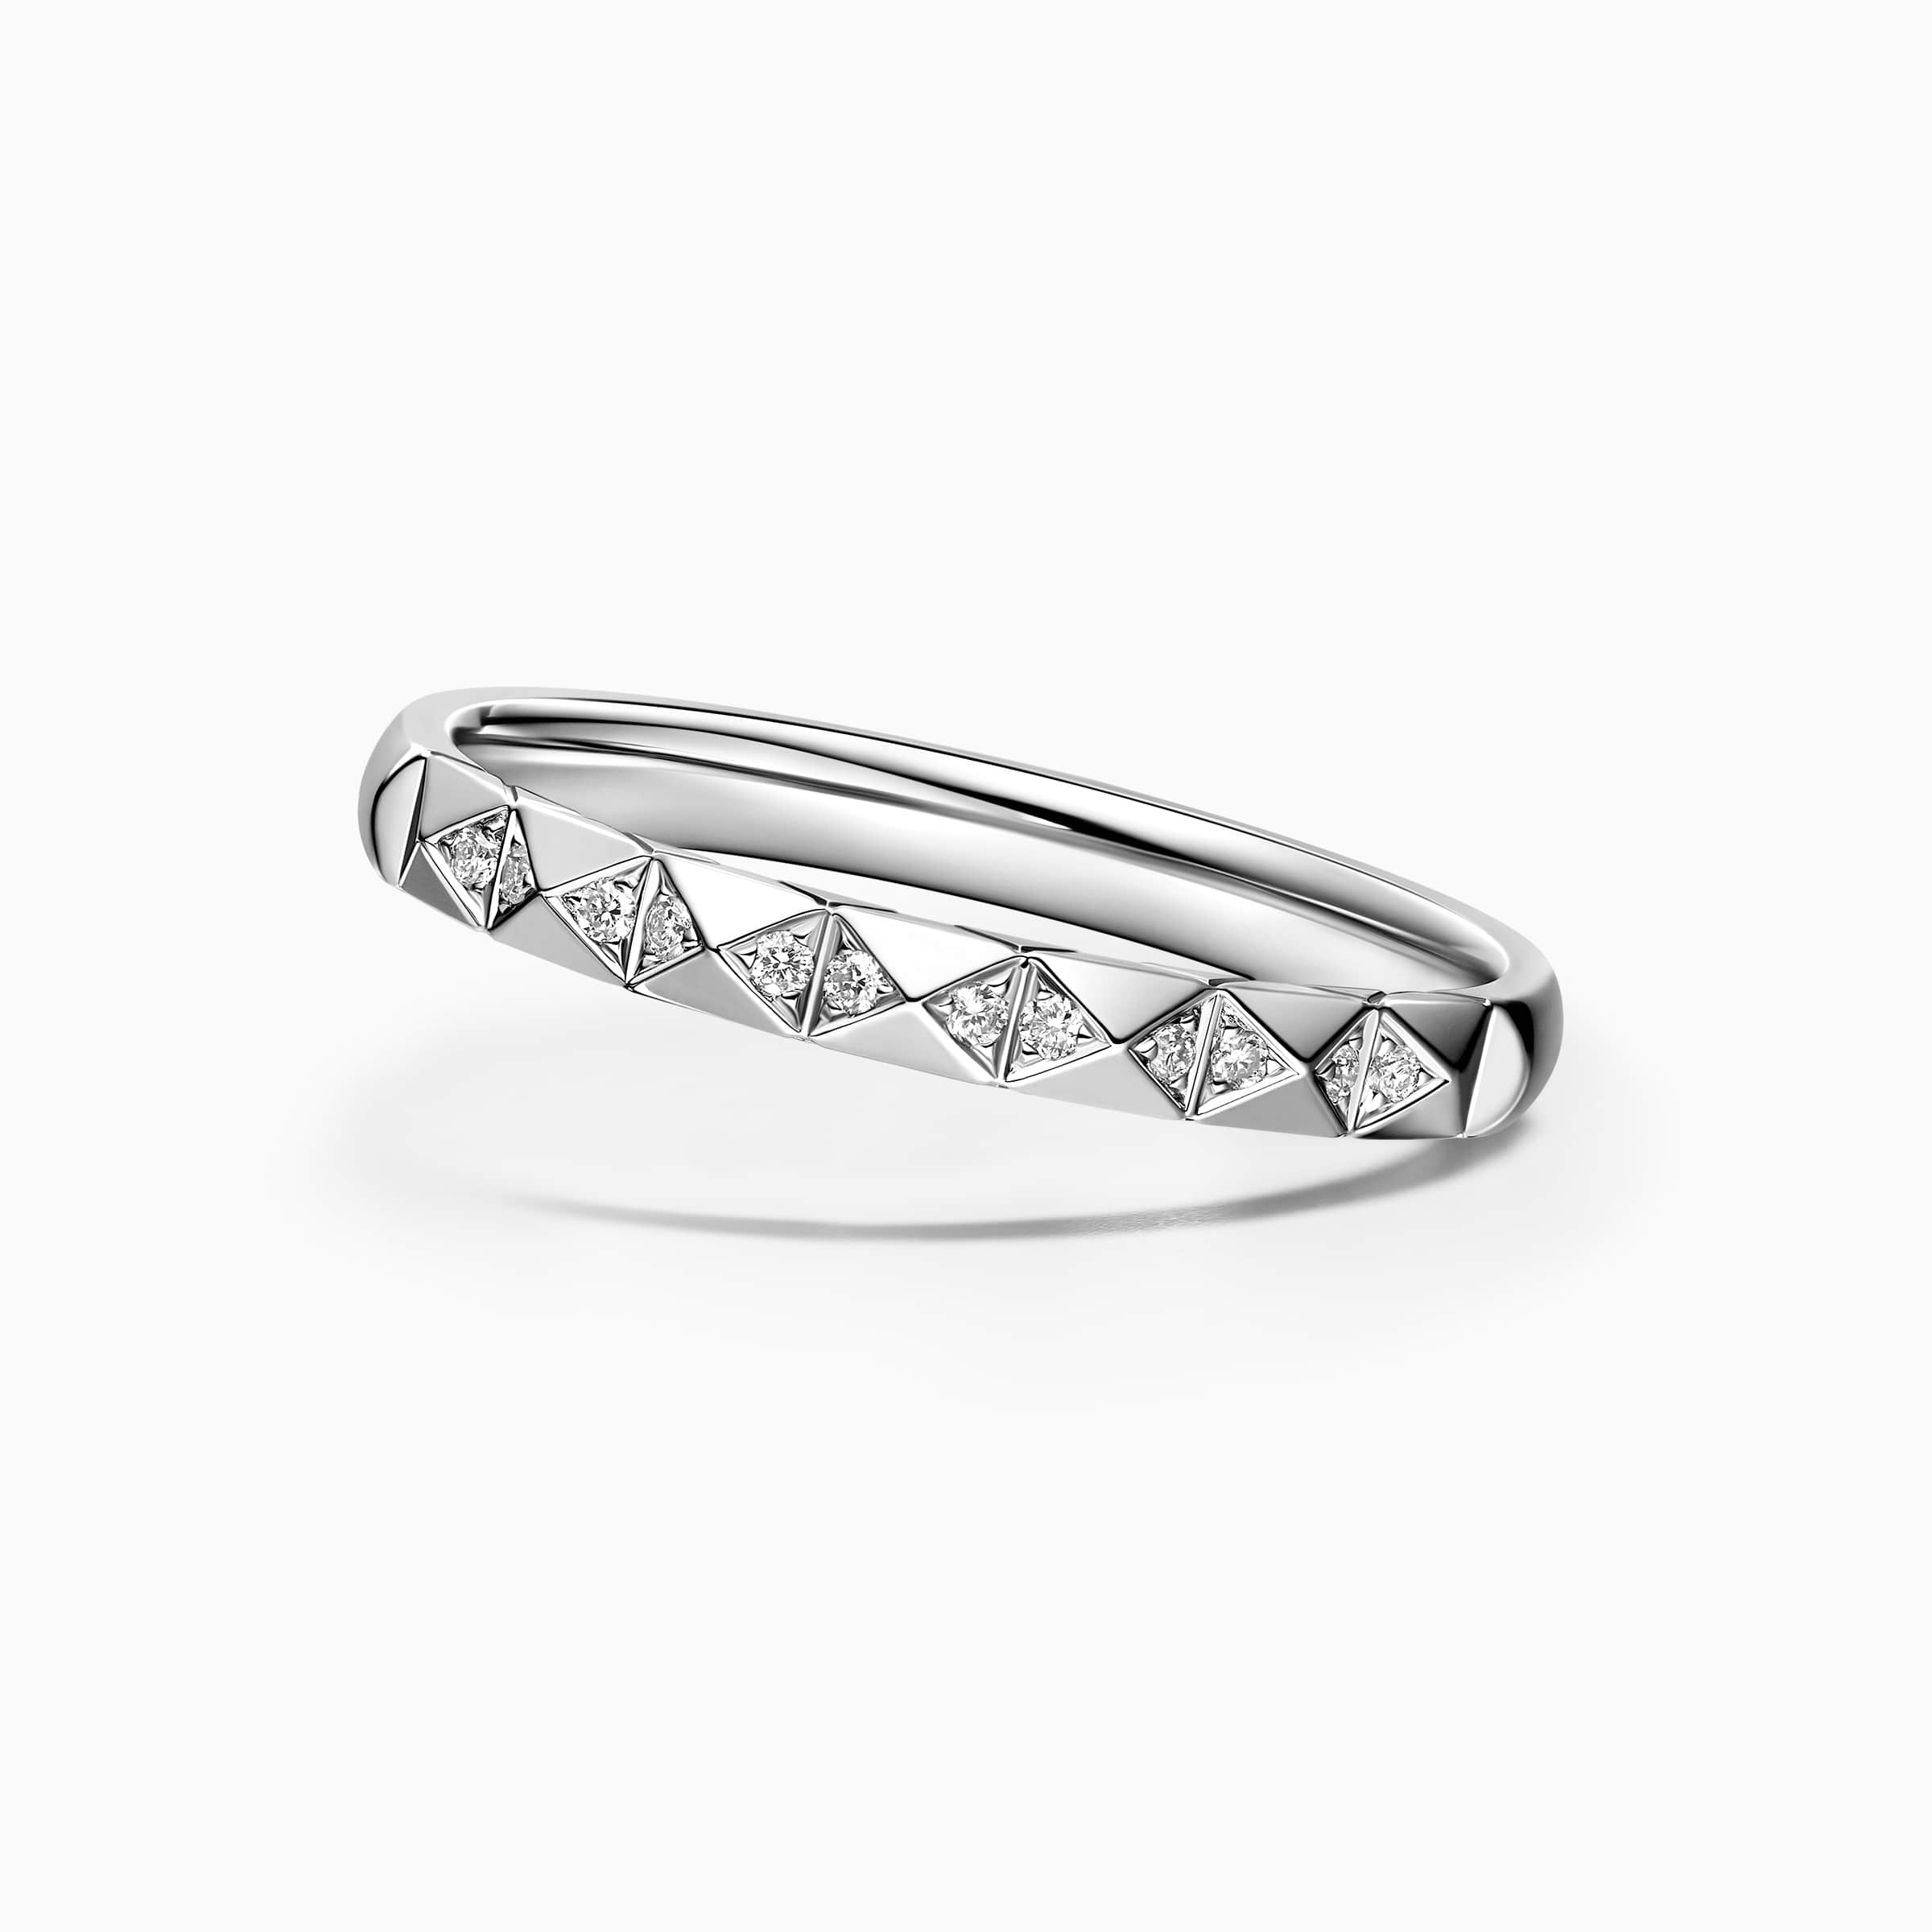 Darry Ring modern wedding band for her